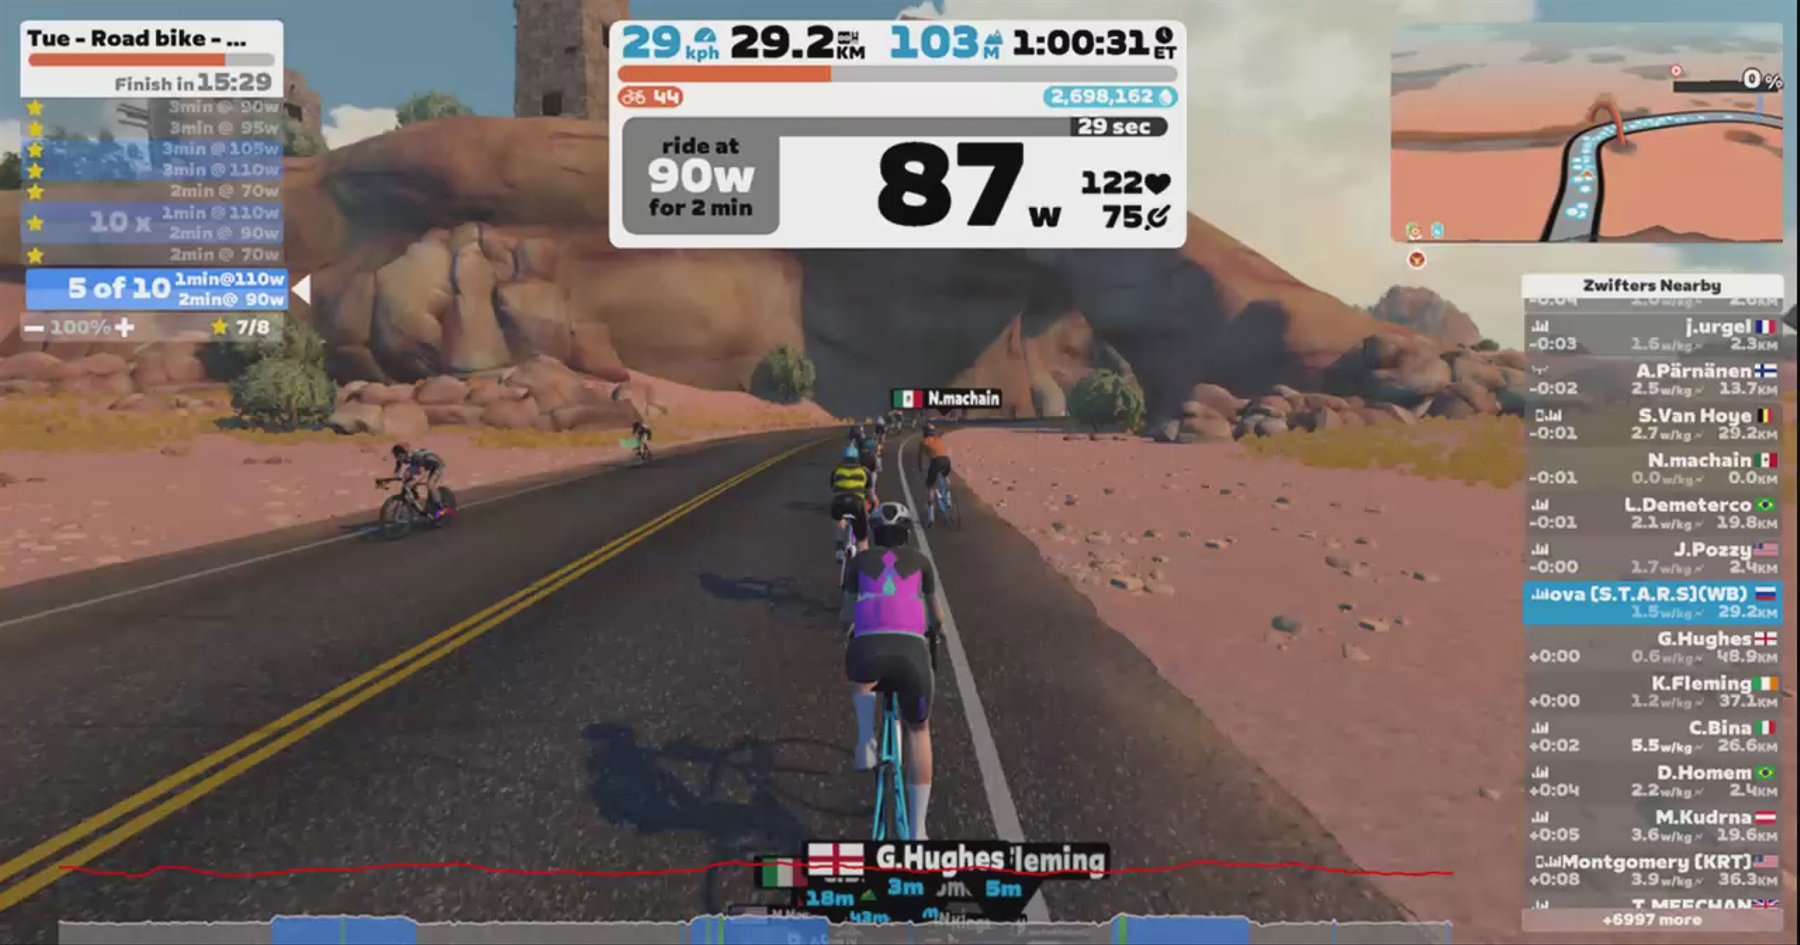 Zwift - Tue - Road bike - Easy Active Recovery in Watopia